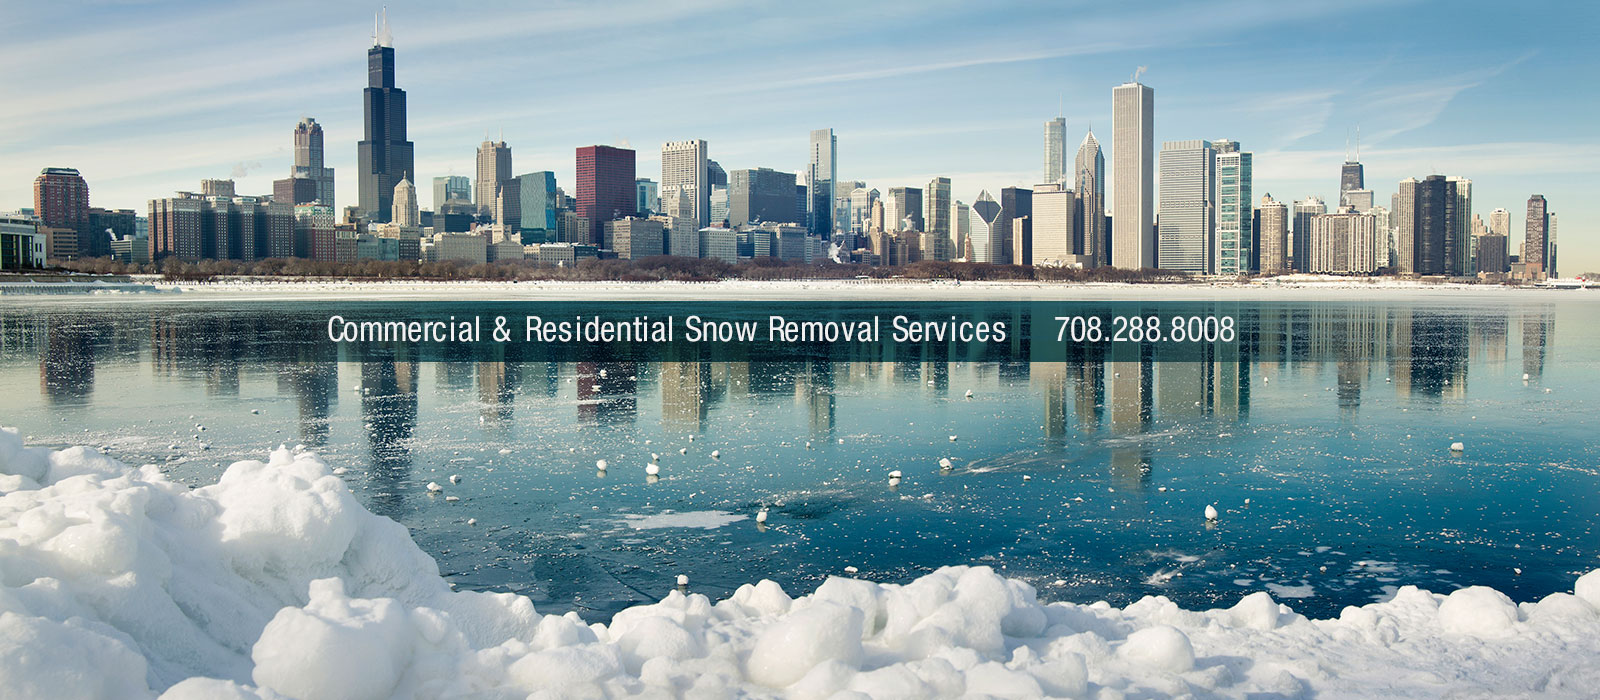 snow removal and ice management, commercial, residential show removal services